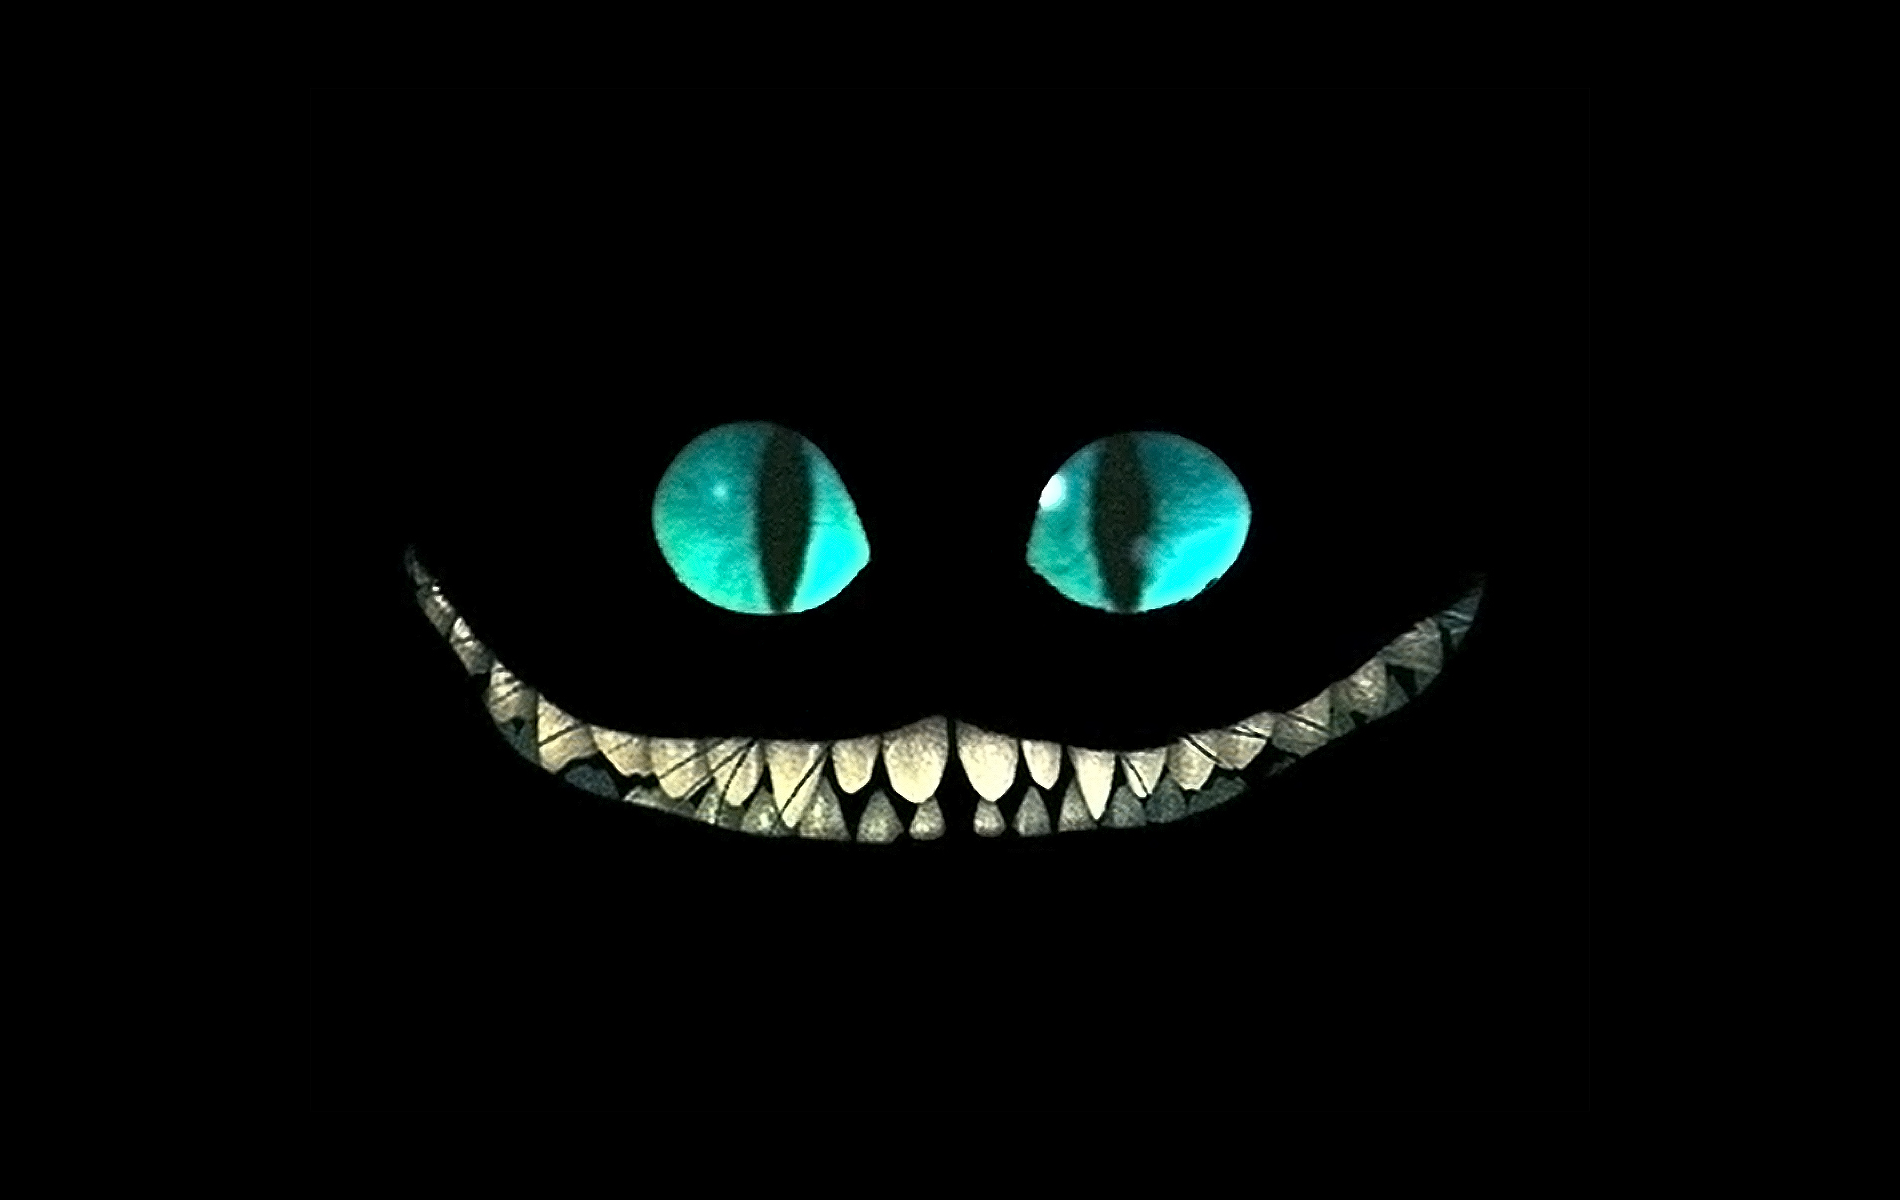 File Name Cheshire Cat Png Resolution Image